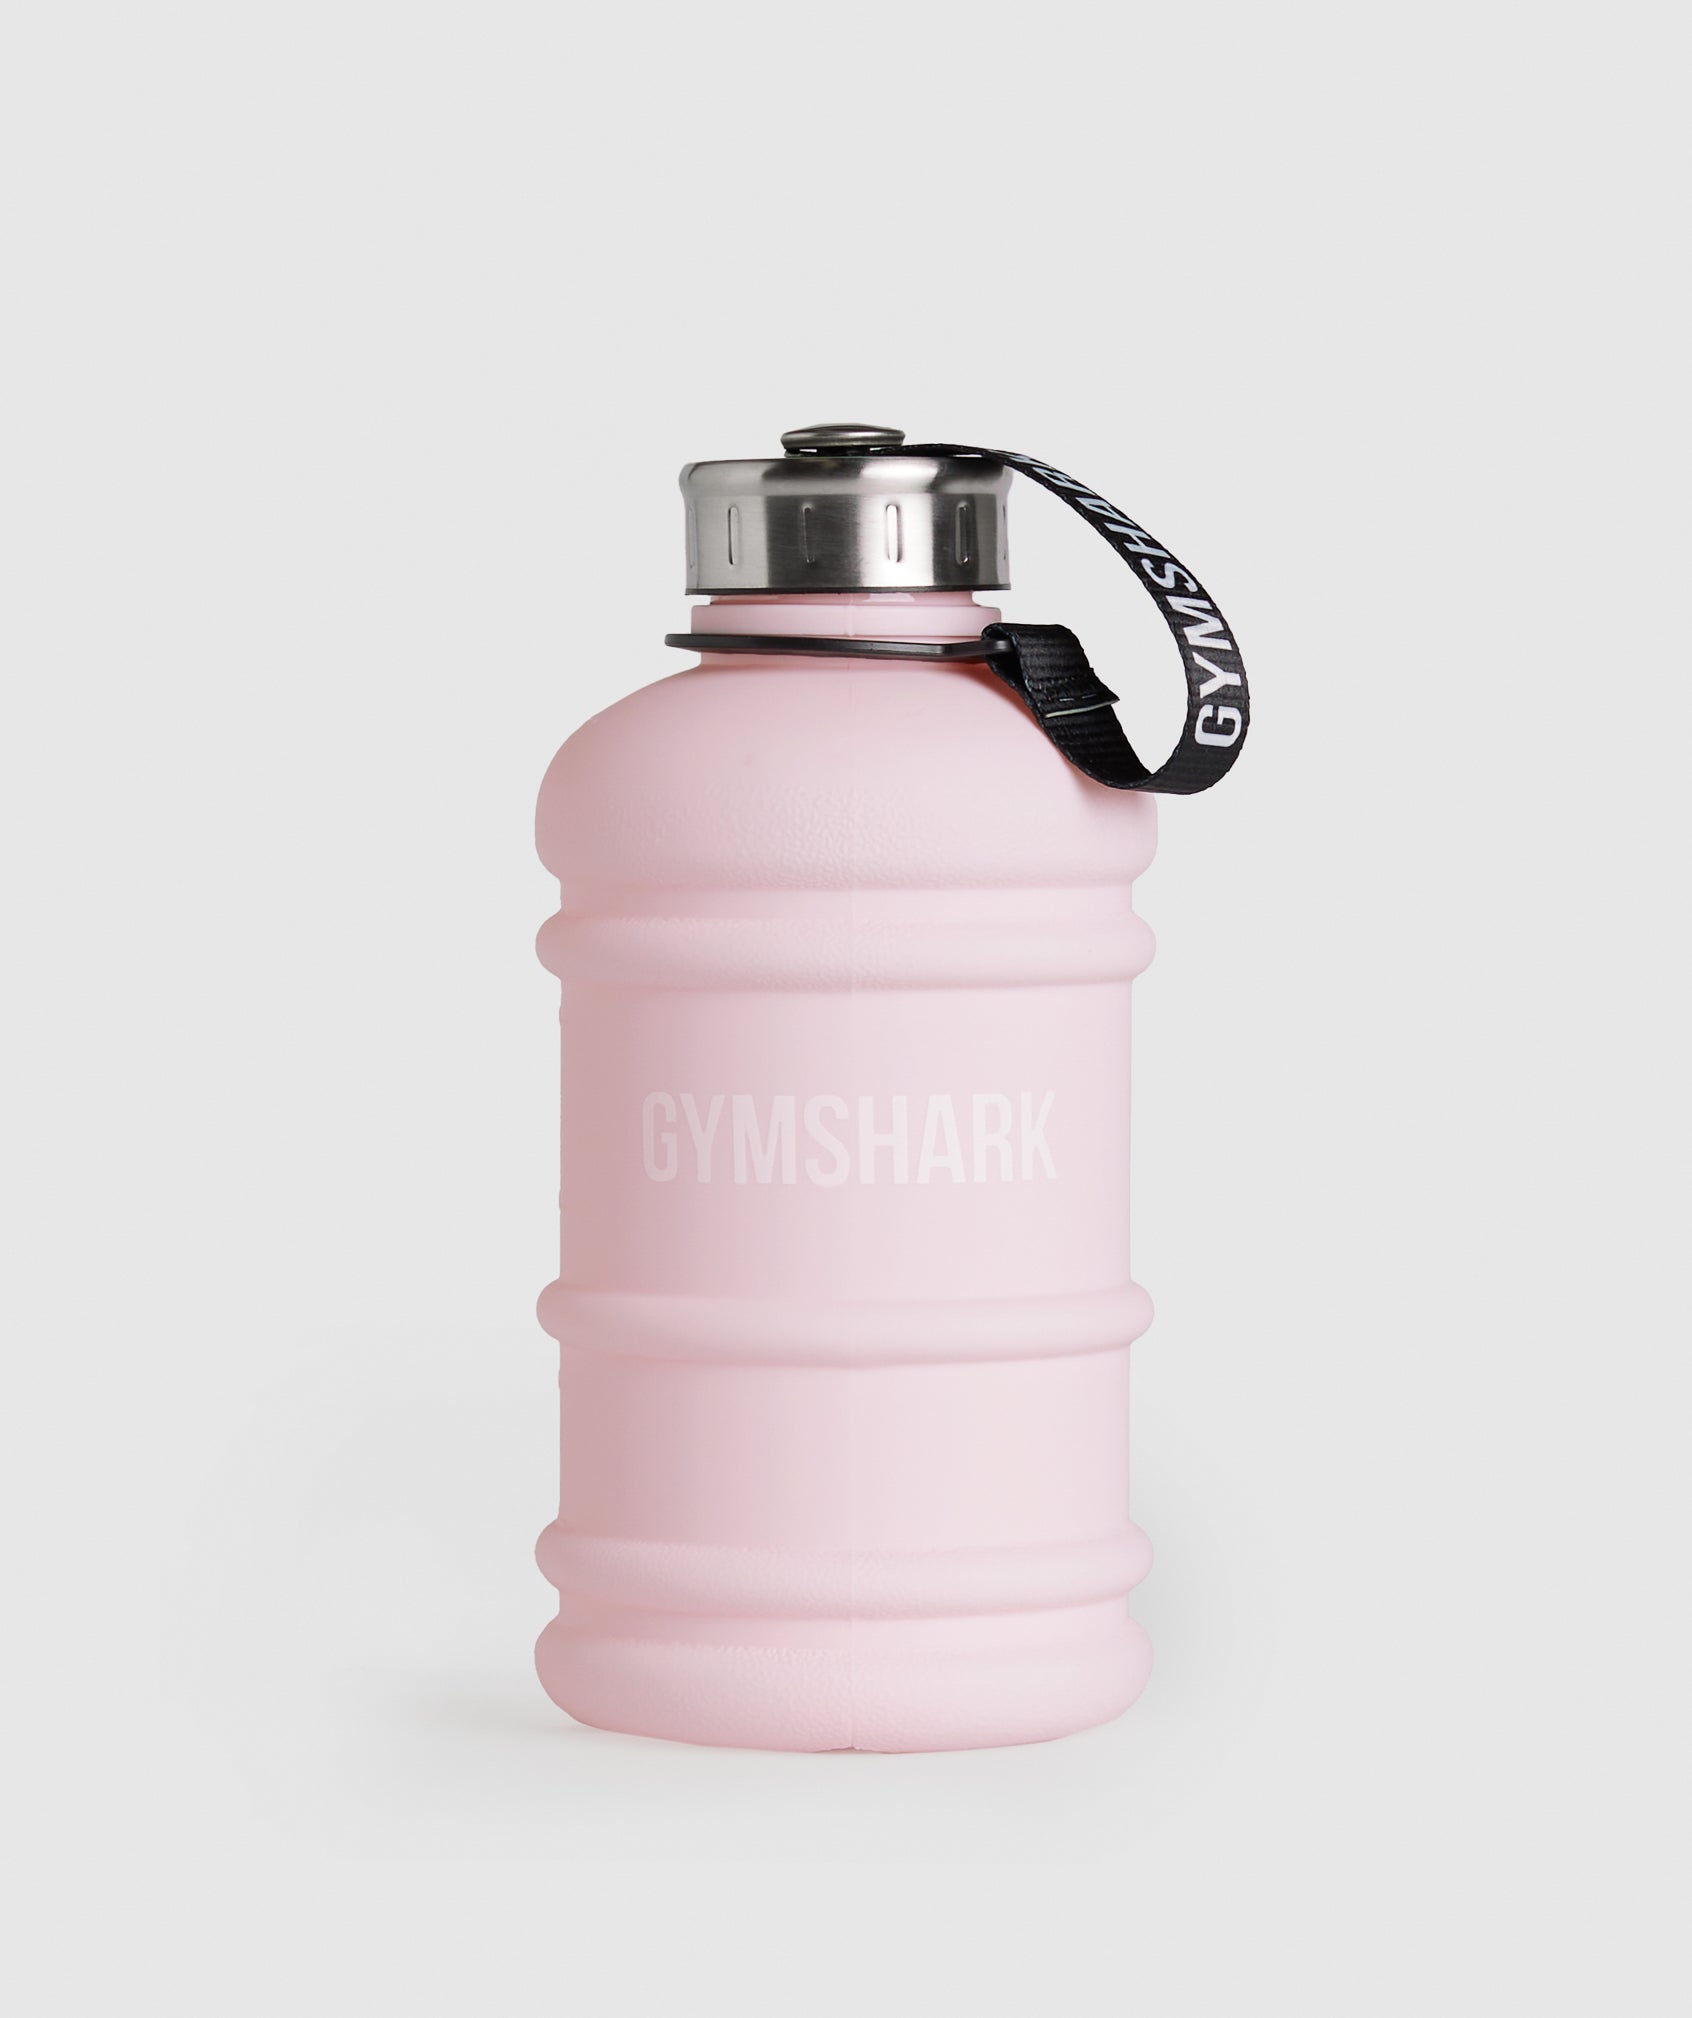 1 liter Water Bottle in Dolly Pink is out of stock